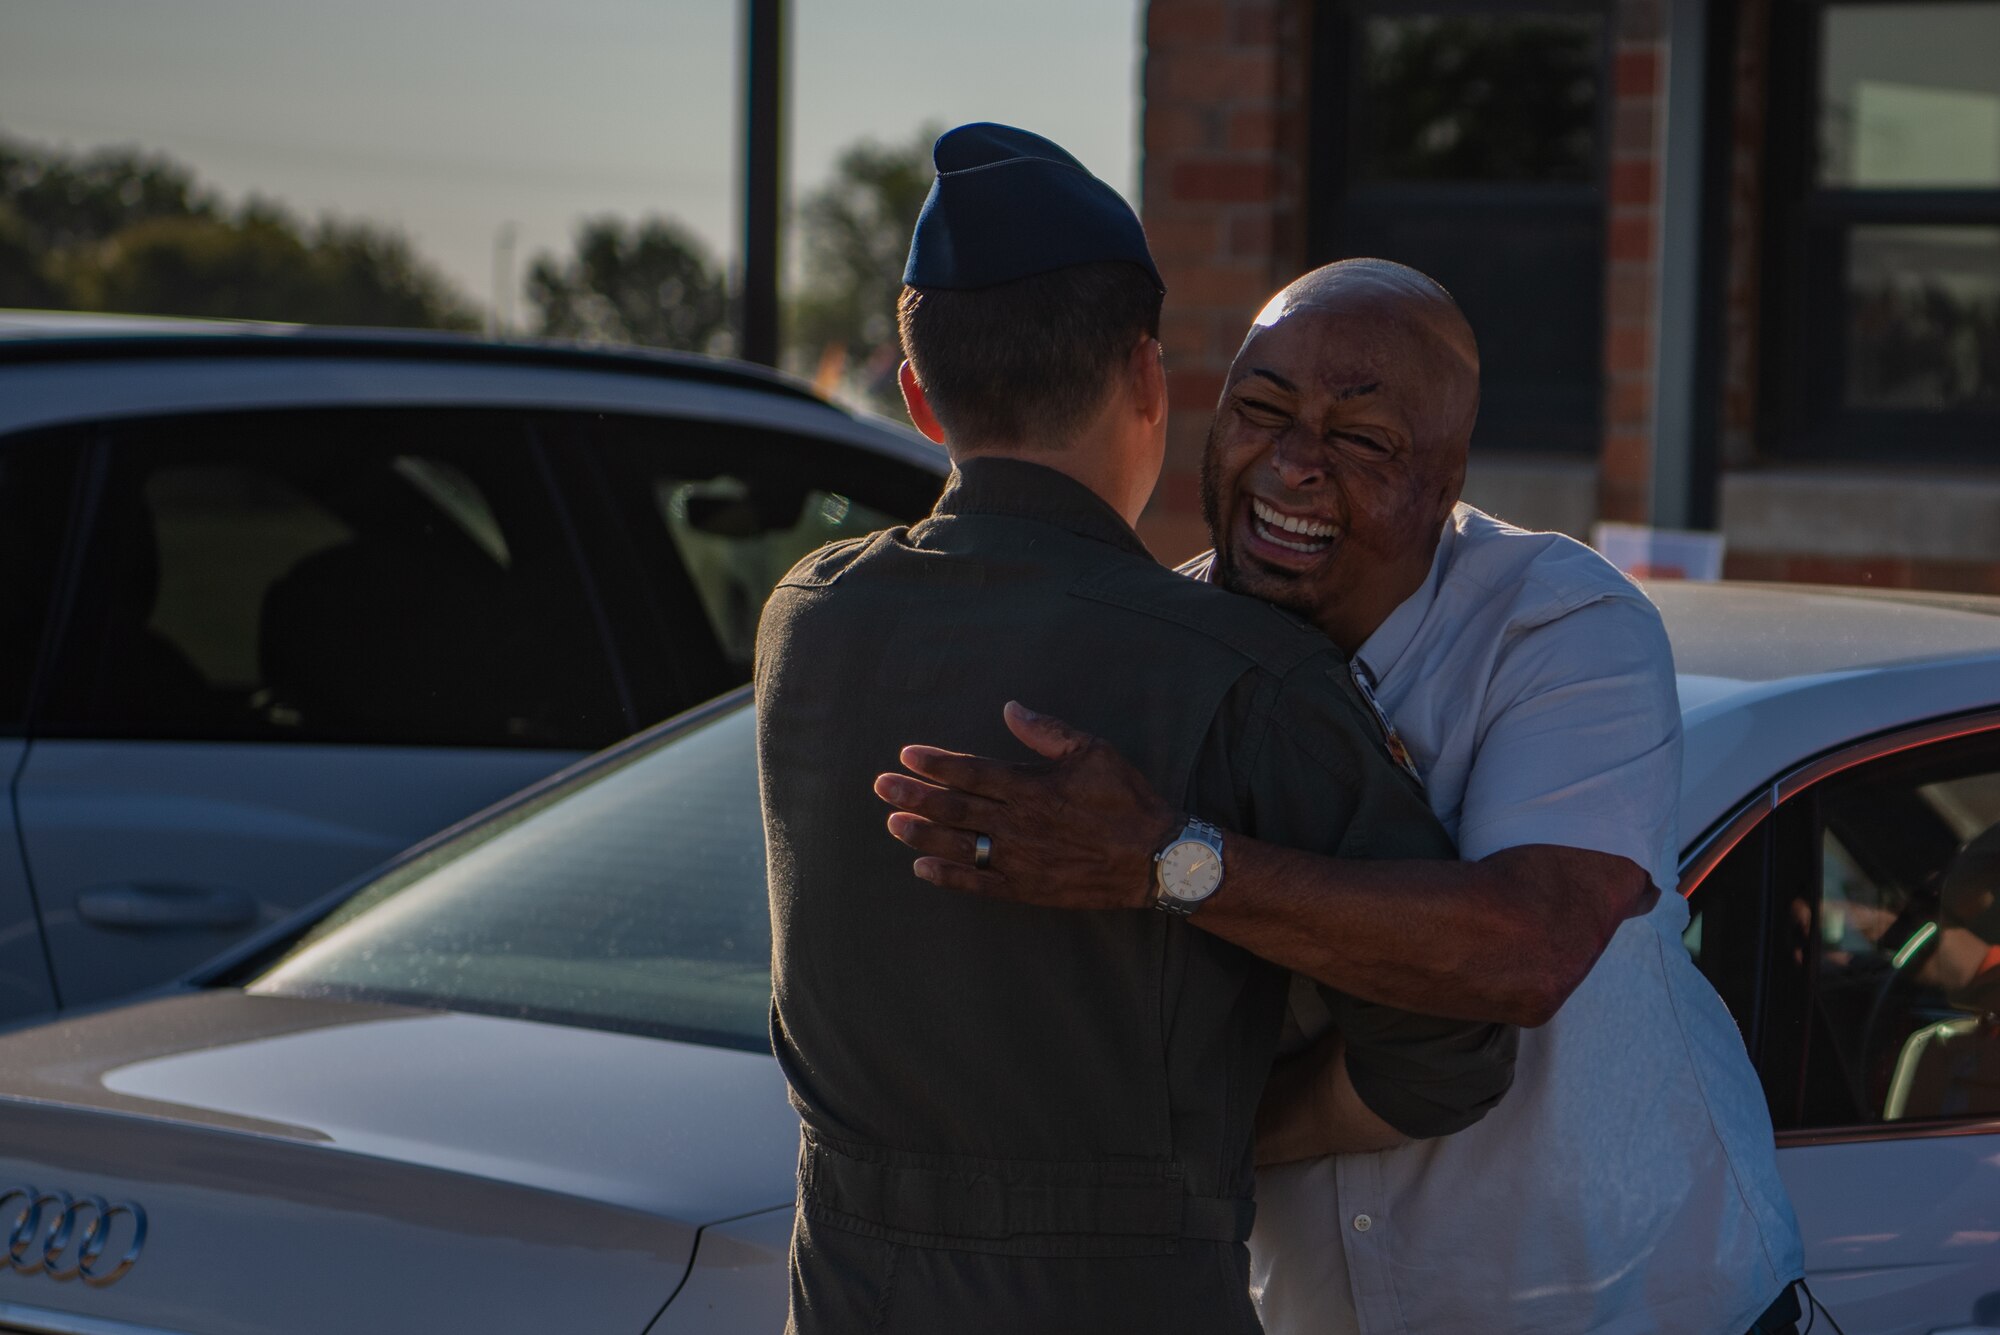 Col. Steven Wick, 317th Airlift Wing vice commander hugs J.R. Martinez, a combat veteran and motivational speaker, during the 317th AW resiliency training day at Dyess Air Force Base, Texas, Sept. 23, 2022. Resiliency training days serve to provide Airmen with the proper life skills to succeed both on and off duty. (U.S. Air Force photo by Airman 1st Class Ryan Hayman)